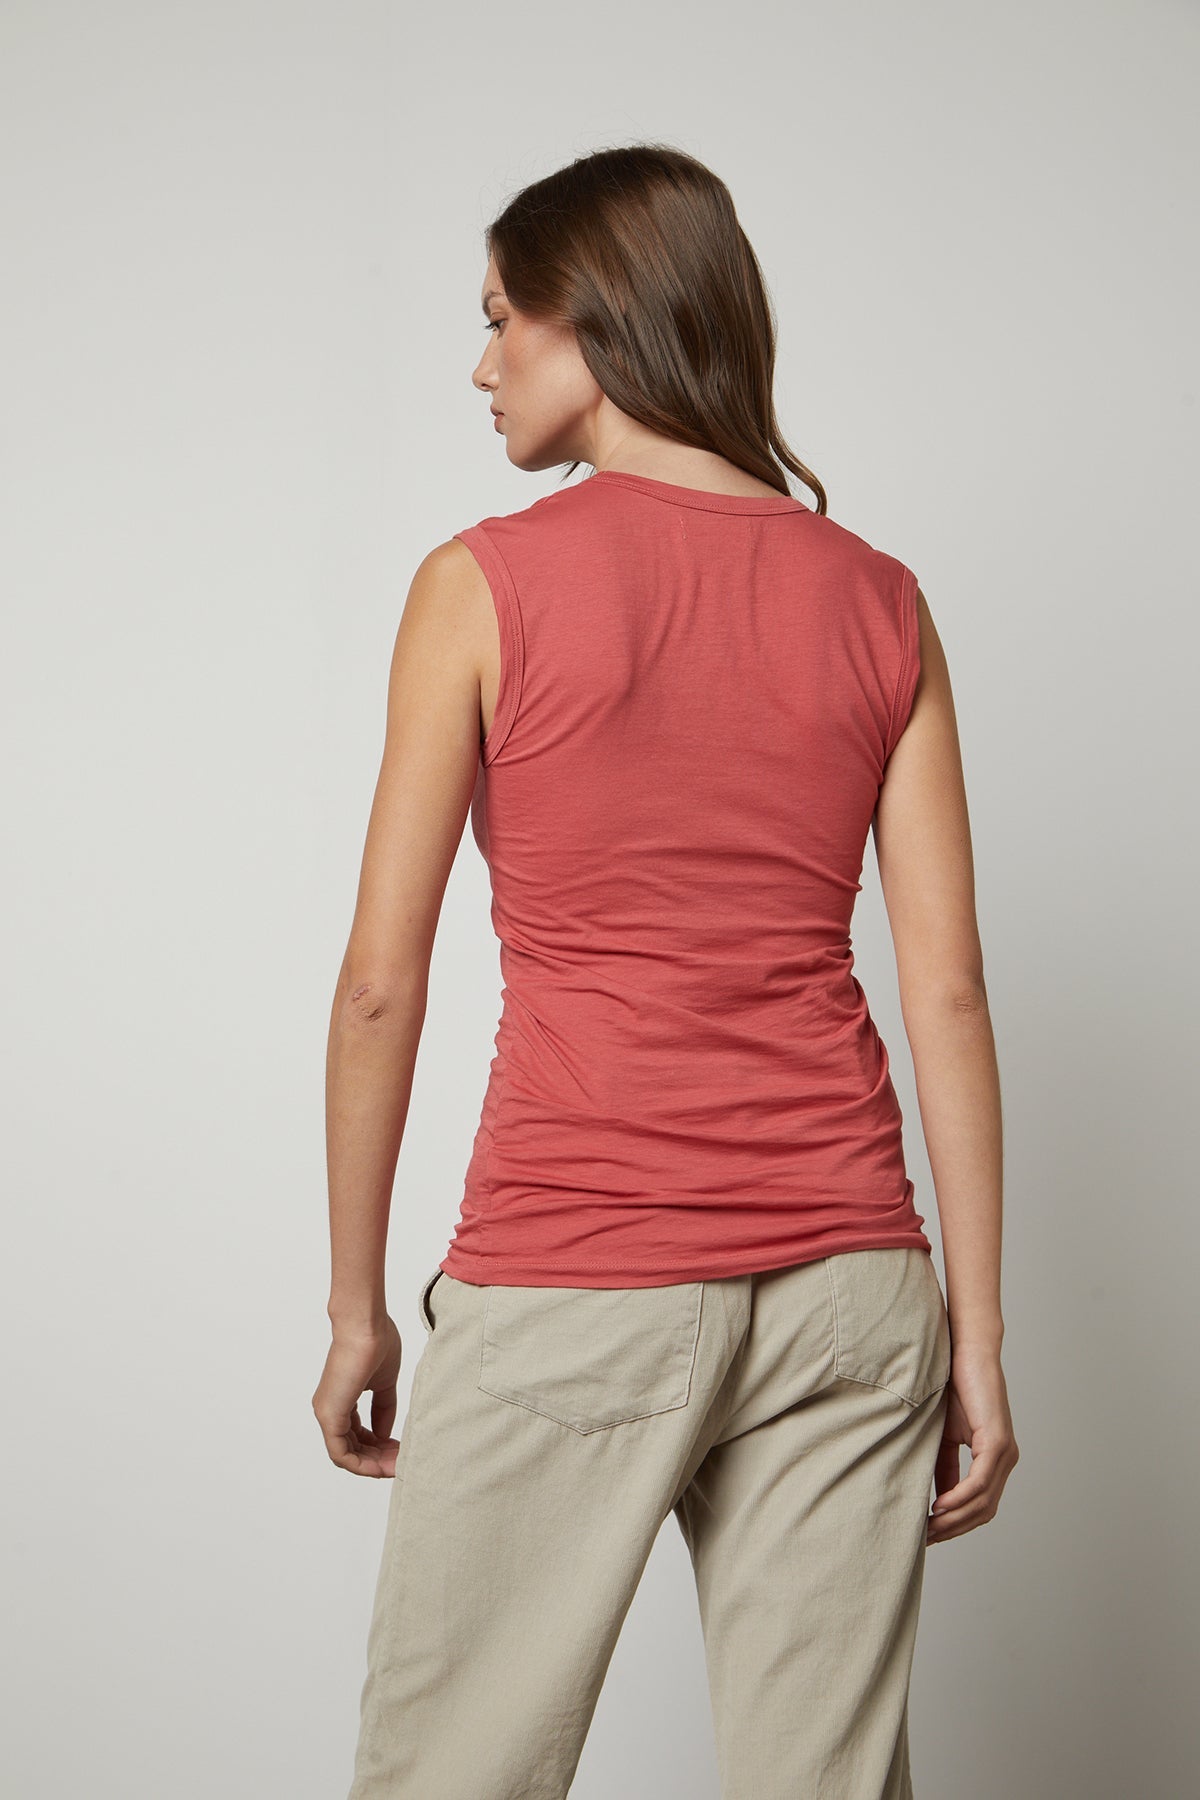 The back view of a woman wearing a Velvet by Graham & Spencer ESTINA GAUZY WHISPER FITTED TANK TOP and khaki pants.-35782798180545